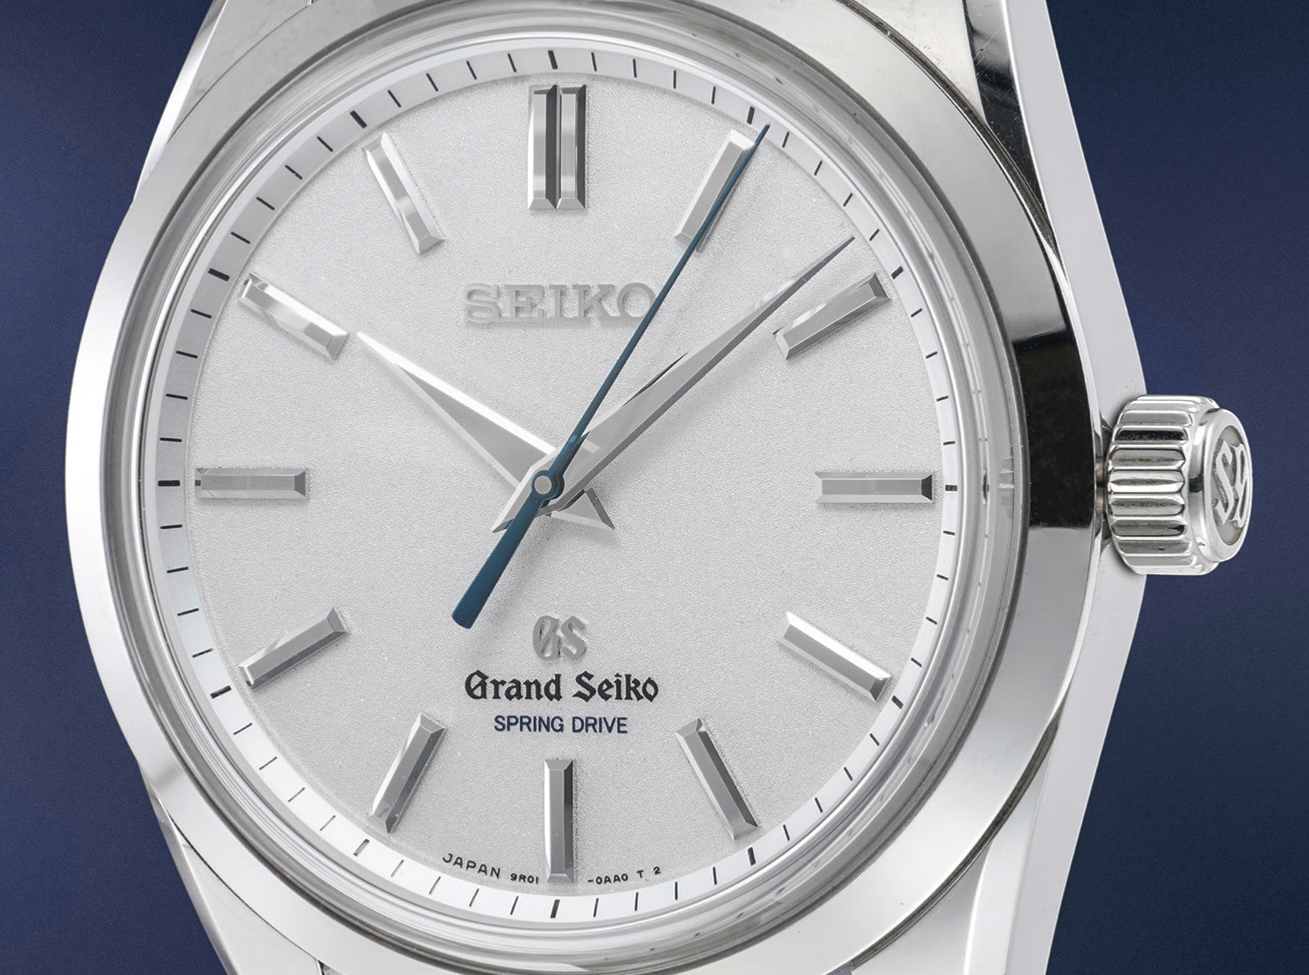 Collectors up prices for Grand Seiko watches auction